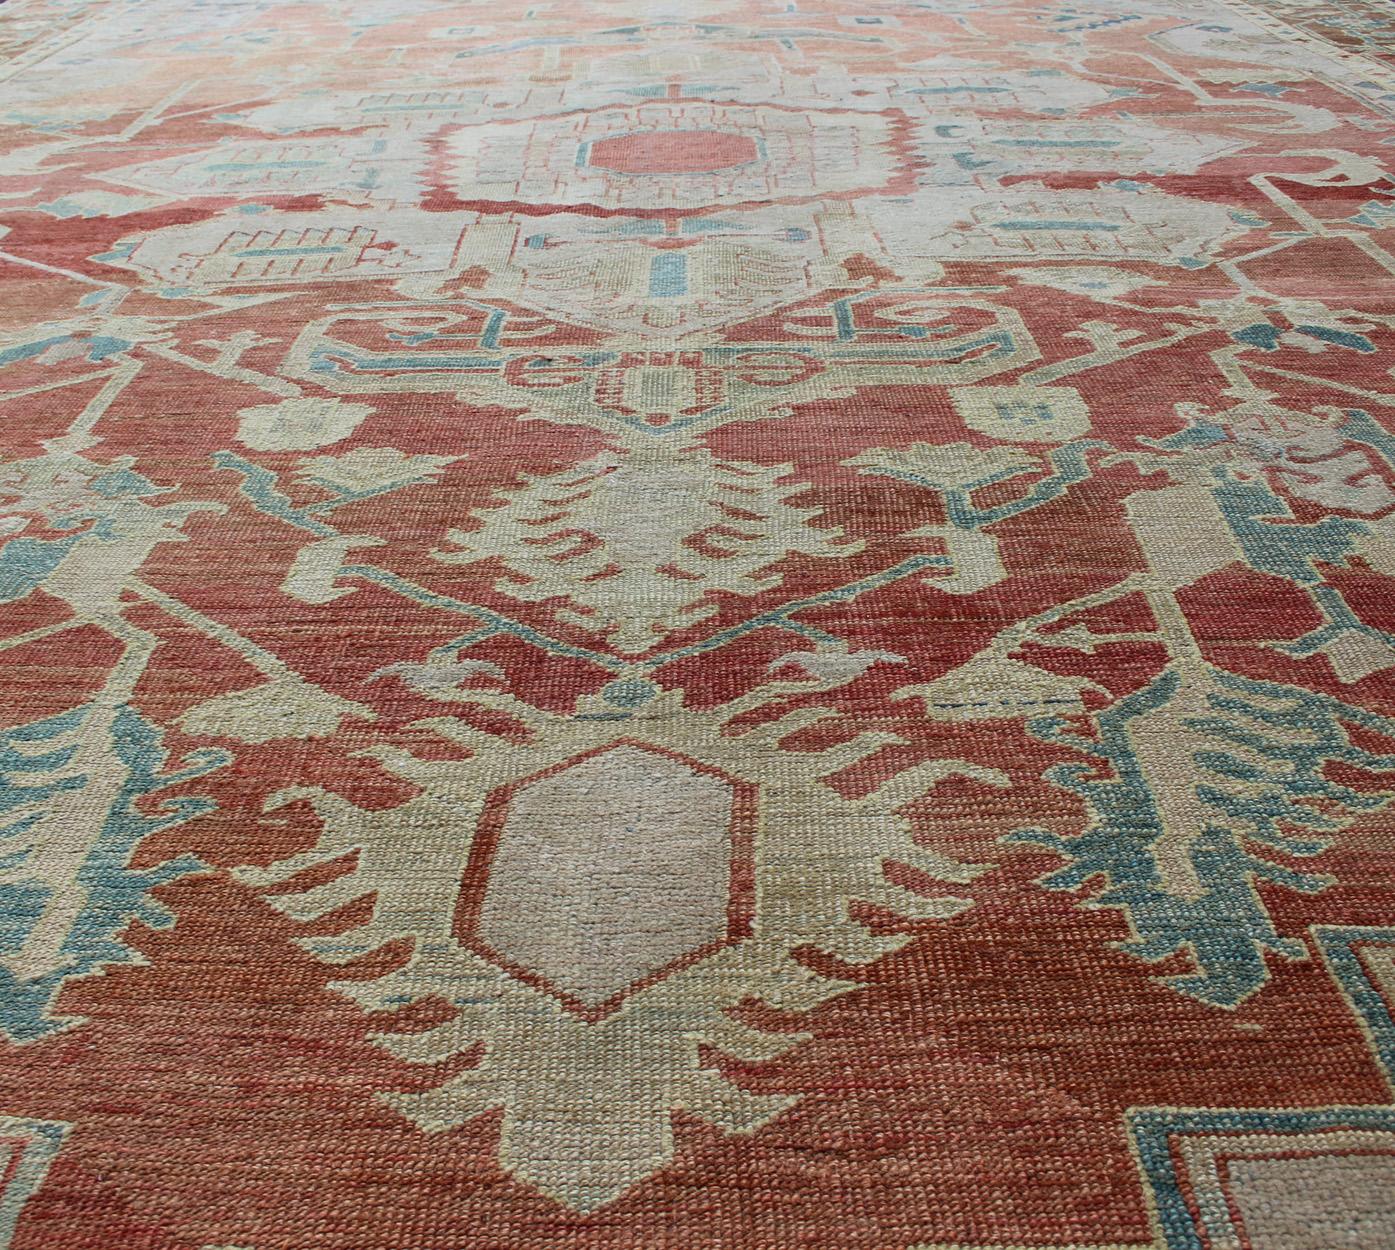 Antique Persian Large Serapi Rug in Soft Red, Taupe, Light Teal and Blue For Sale 4